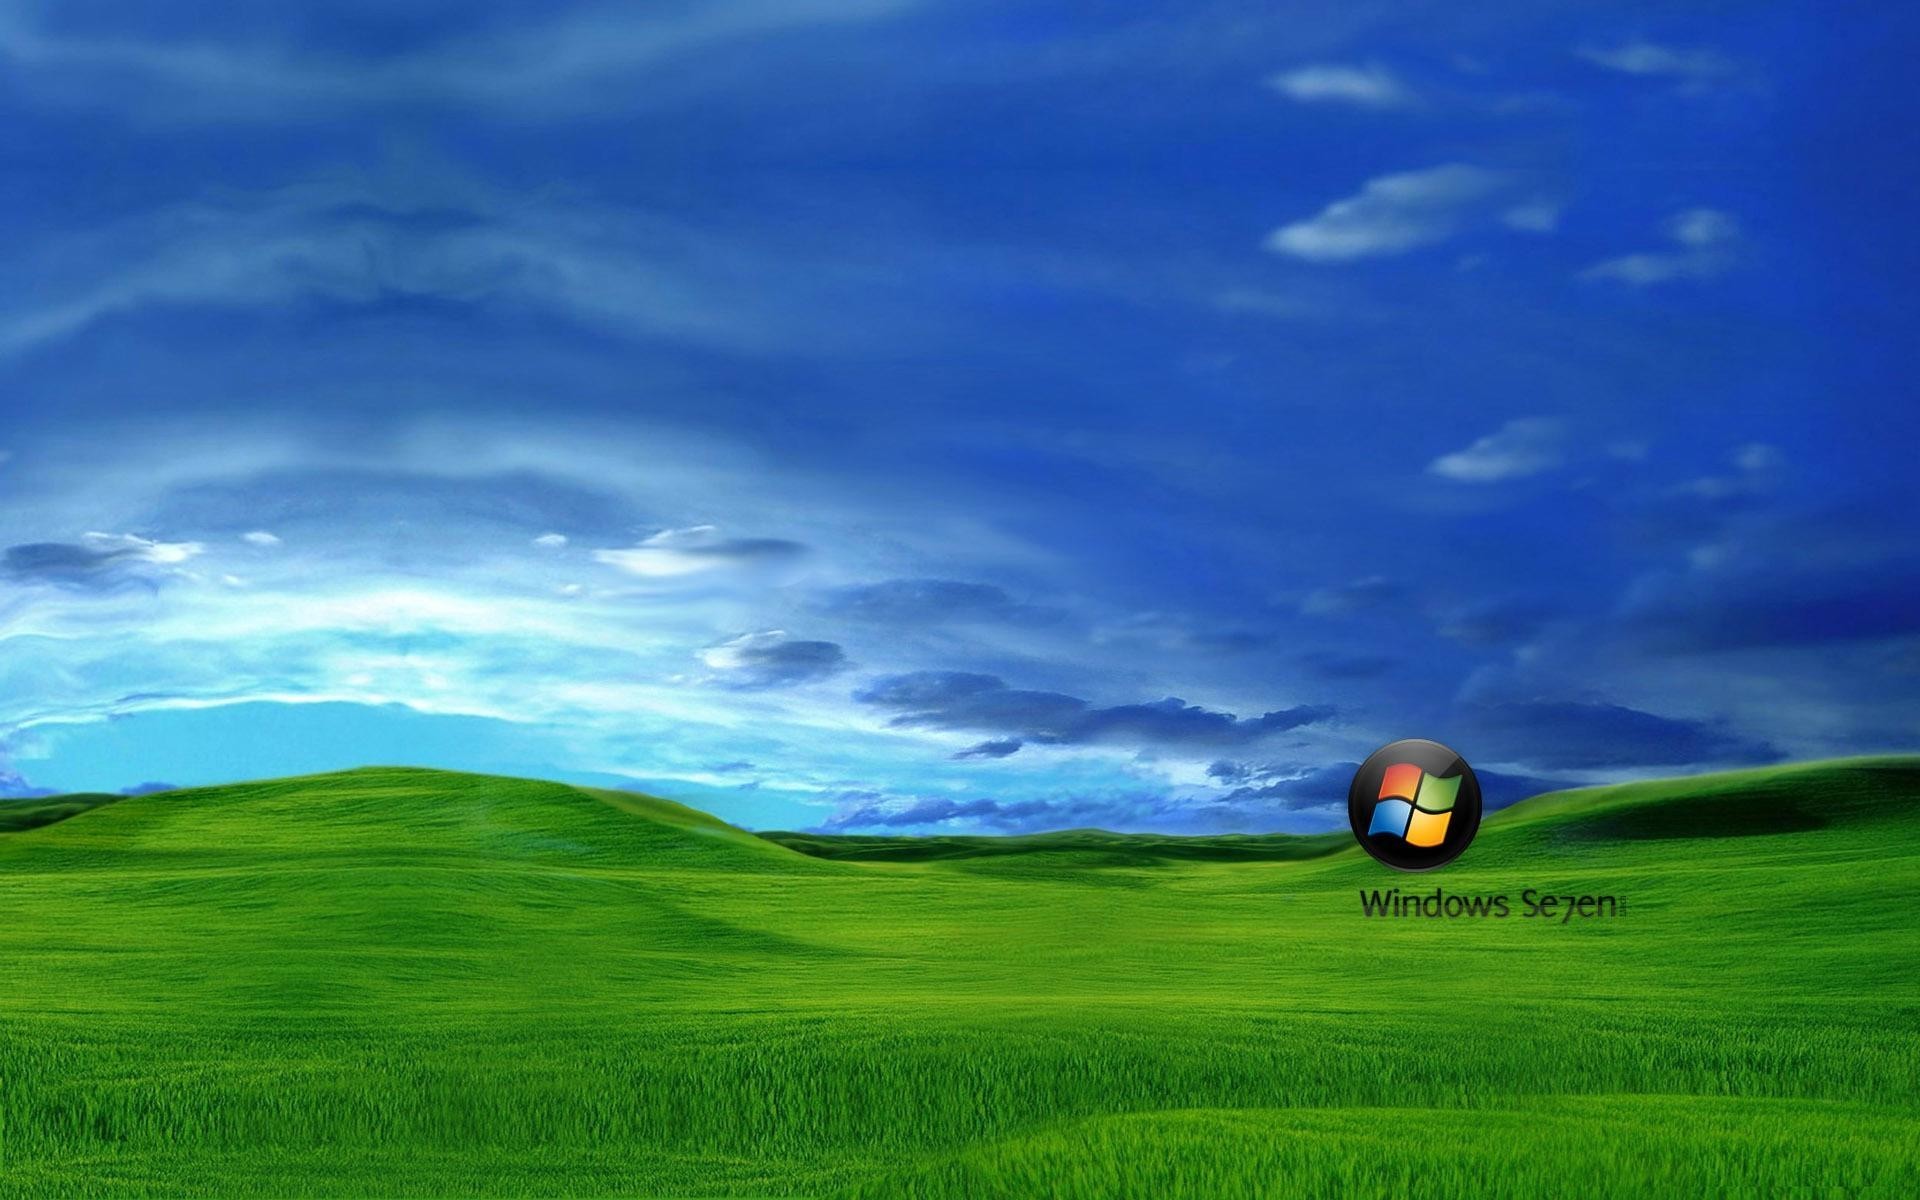 1920x1200 windows 7 hd wallpapers 1080p free download #770321